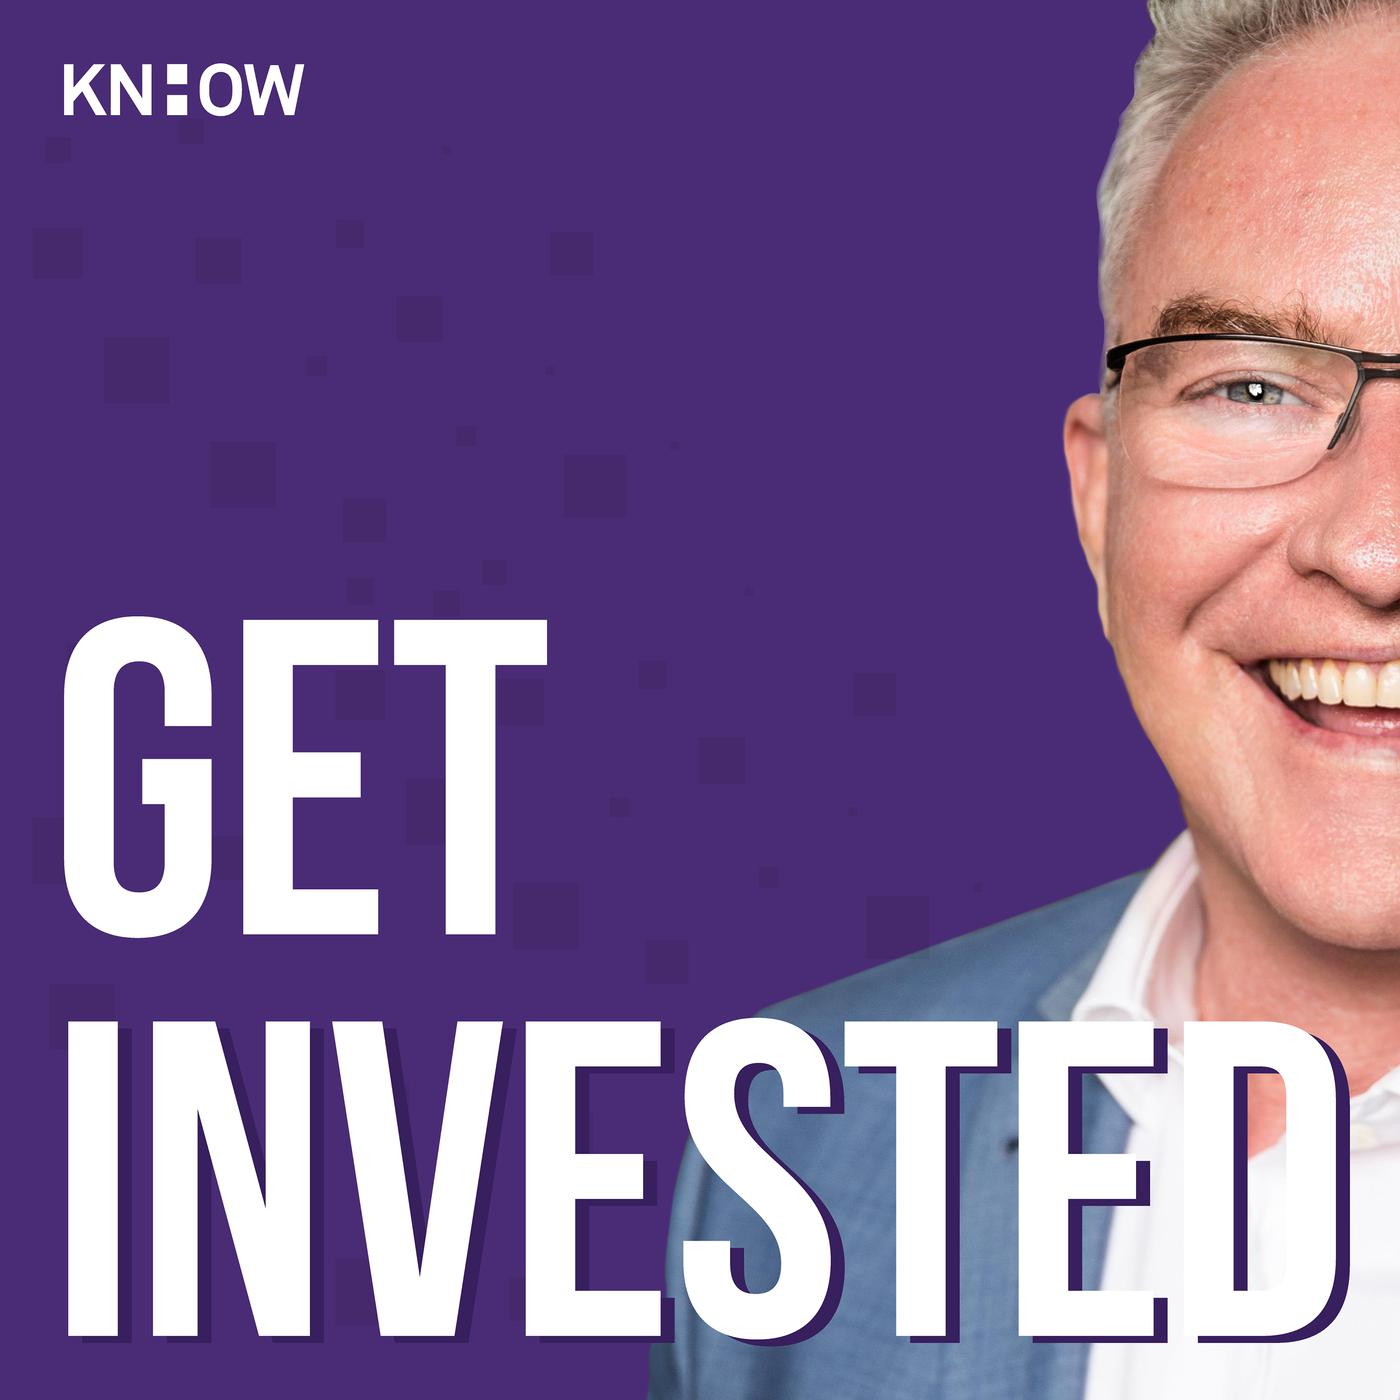 Get Invested: Part 1 - Michael Olivieri on investing in time